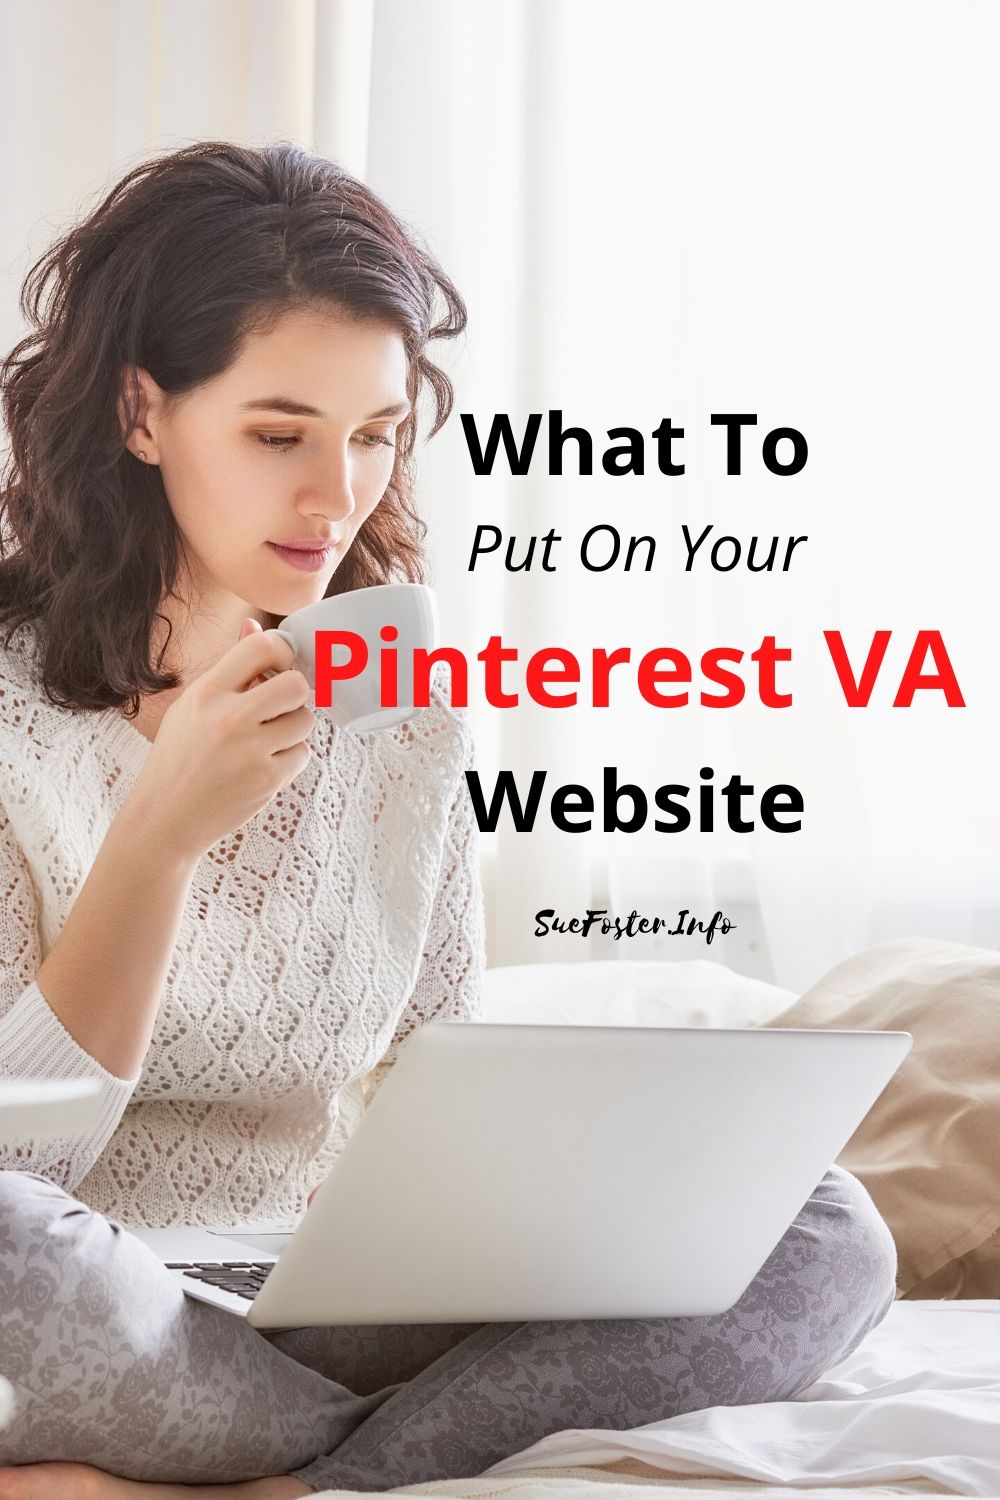 What to put on your Pinterest VA website